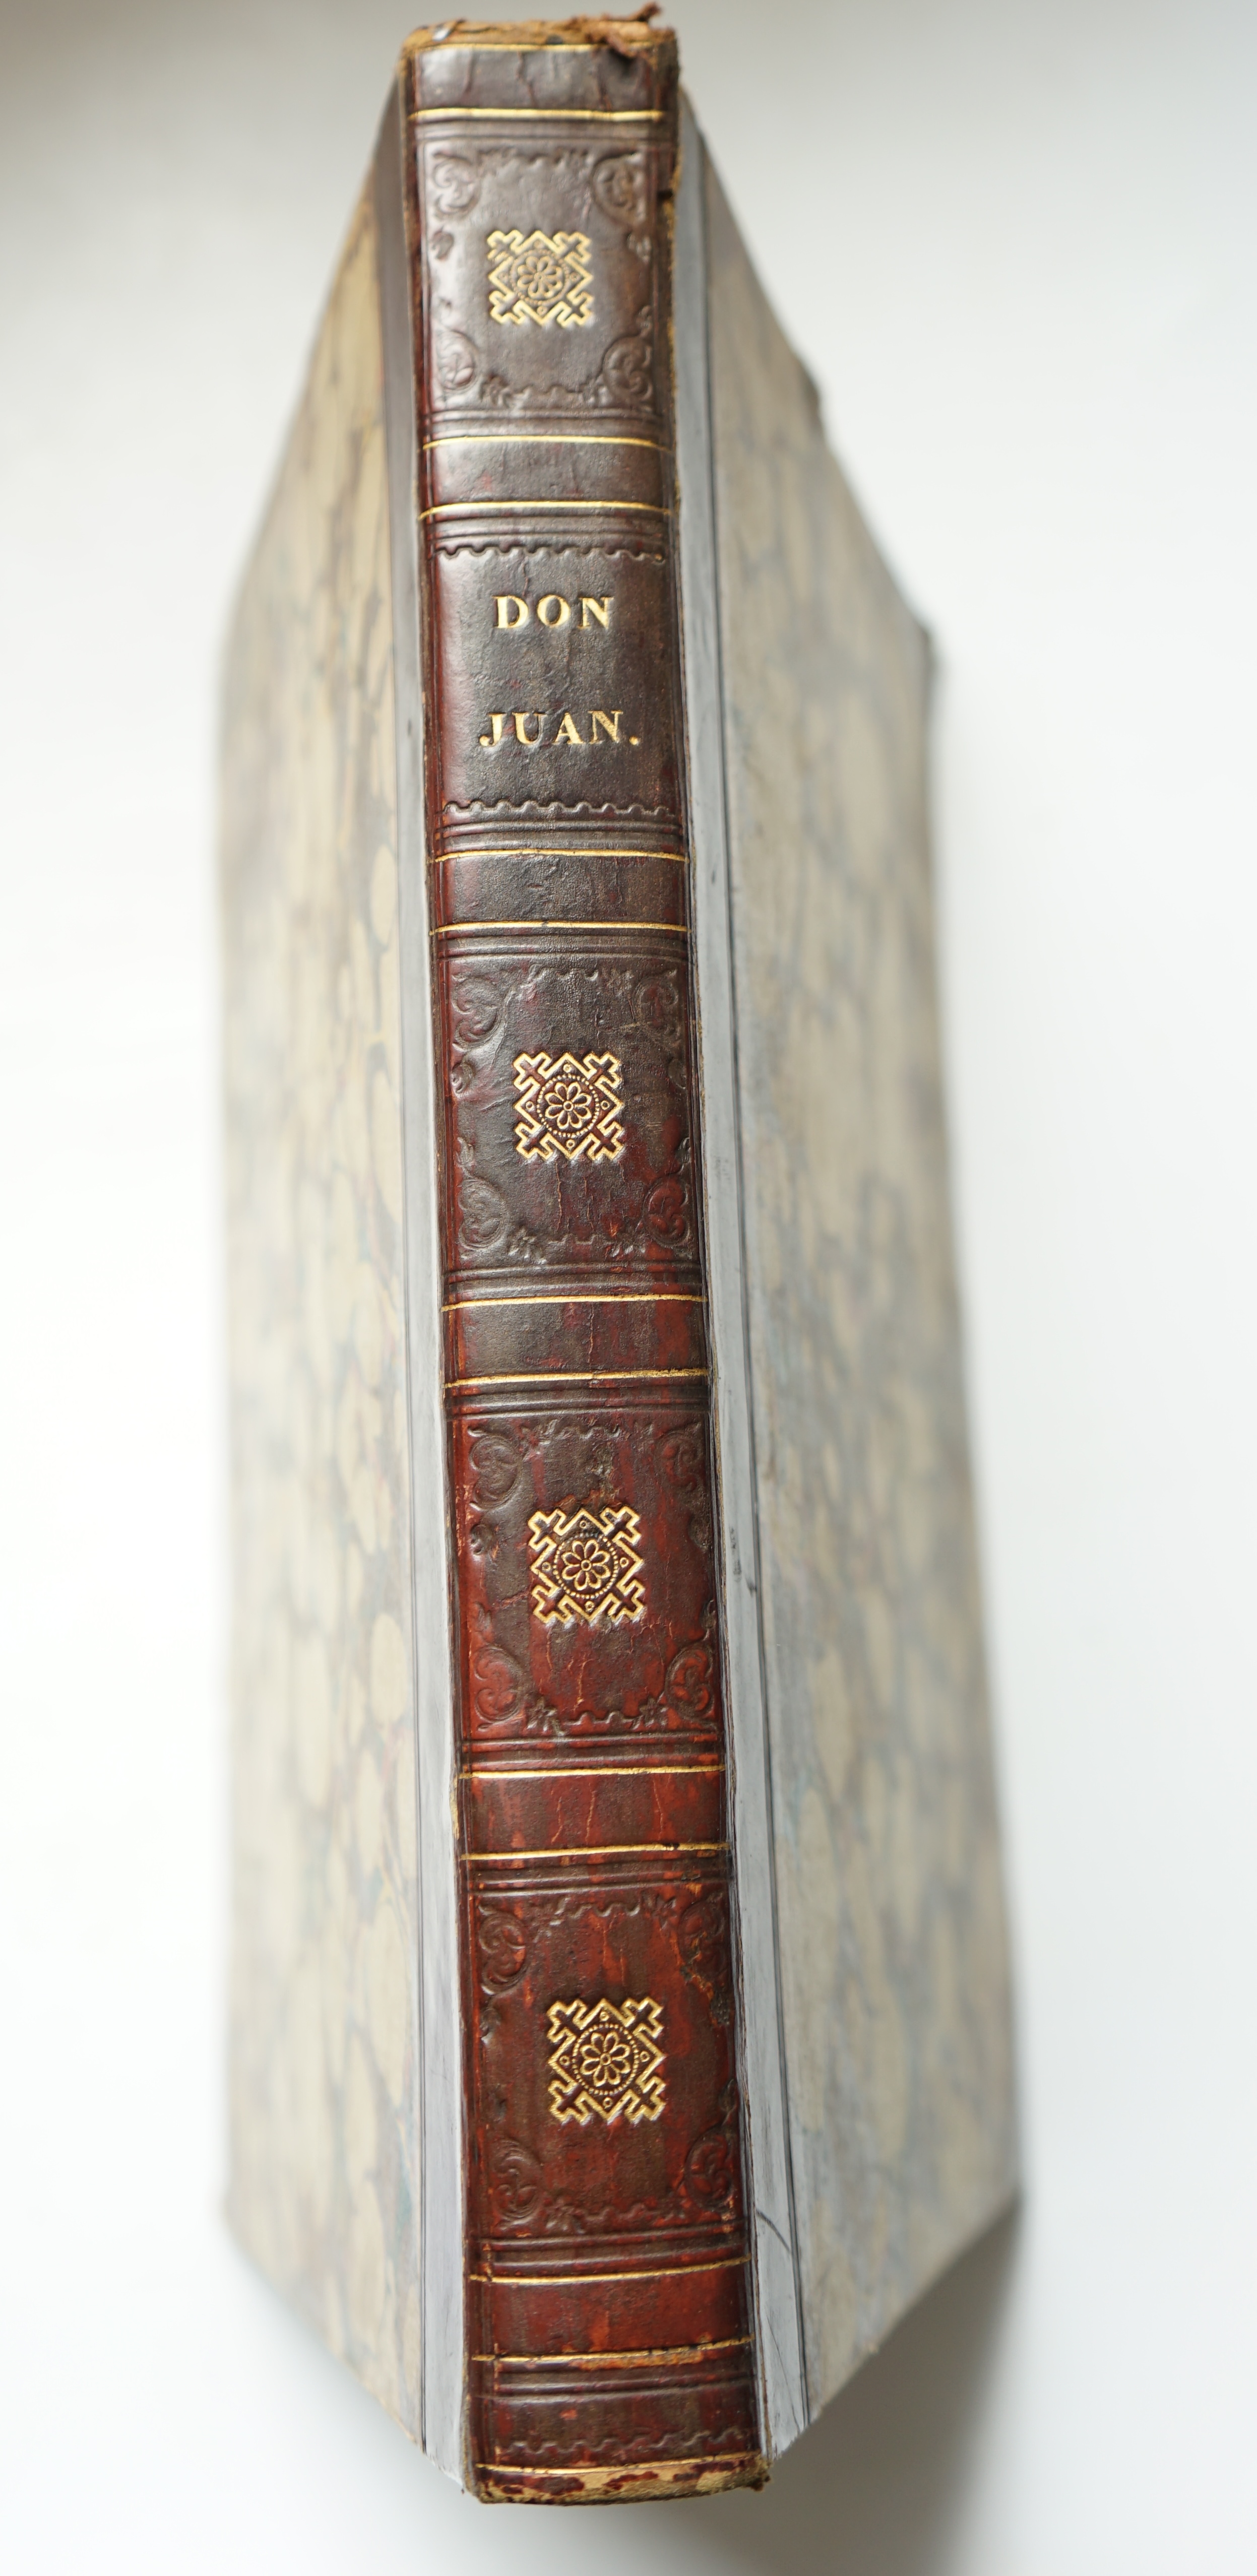 Byron, George Gordon Noel, Lord - Don Juan, Cantos 1 & 2, 1st edition, 4to, half calf with marbled boards, Thomas Davison, Whitefriars, [for John Murray], London, 1819.